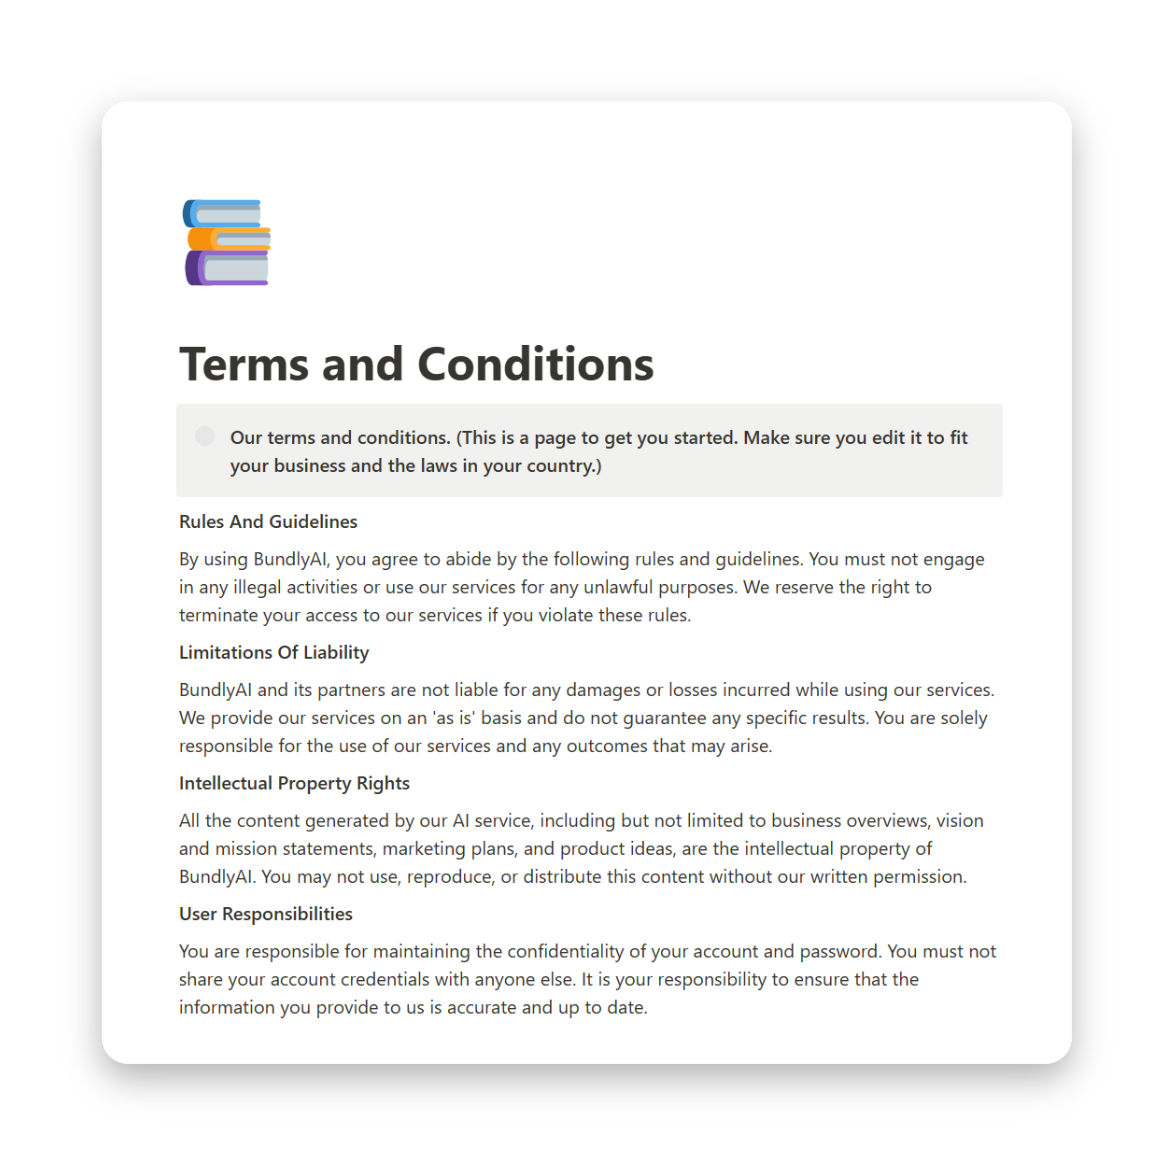 A screenshot of the 'Terms and Conditions' page on BundlyAI, outlining the rules, guidelines, responsibilities, and liabilities related to the use of your service or product.